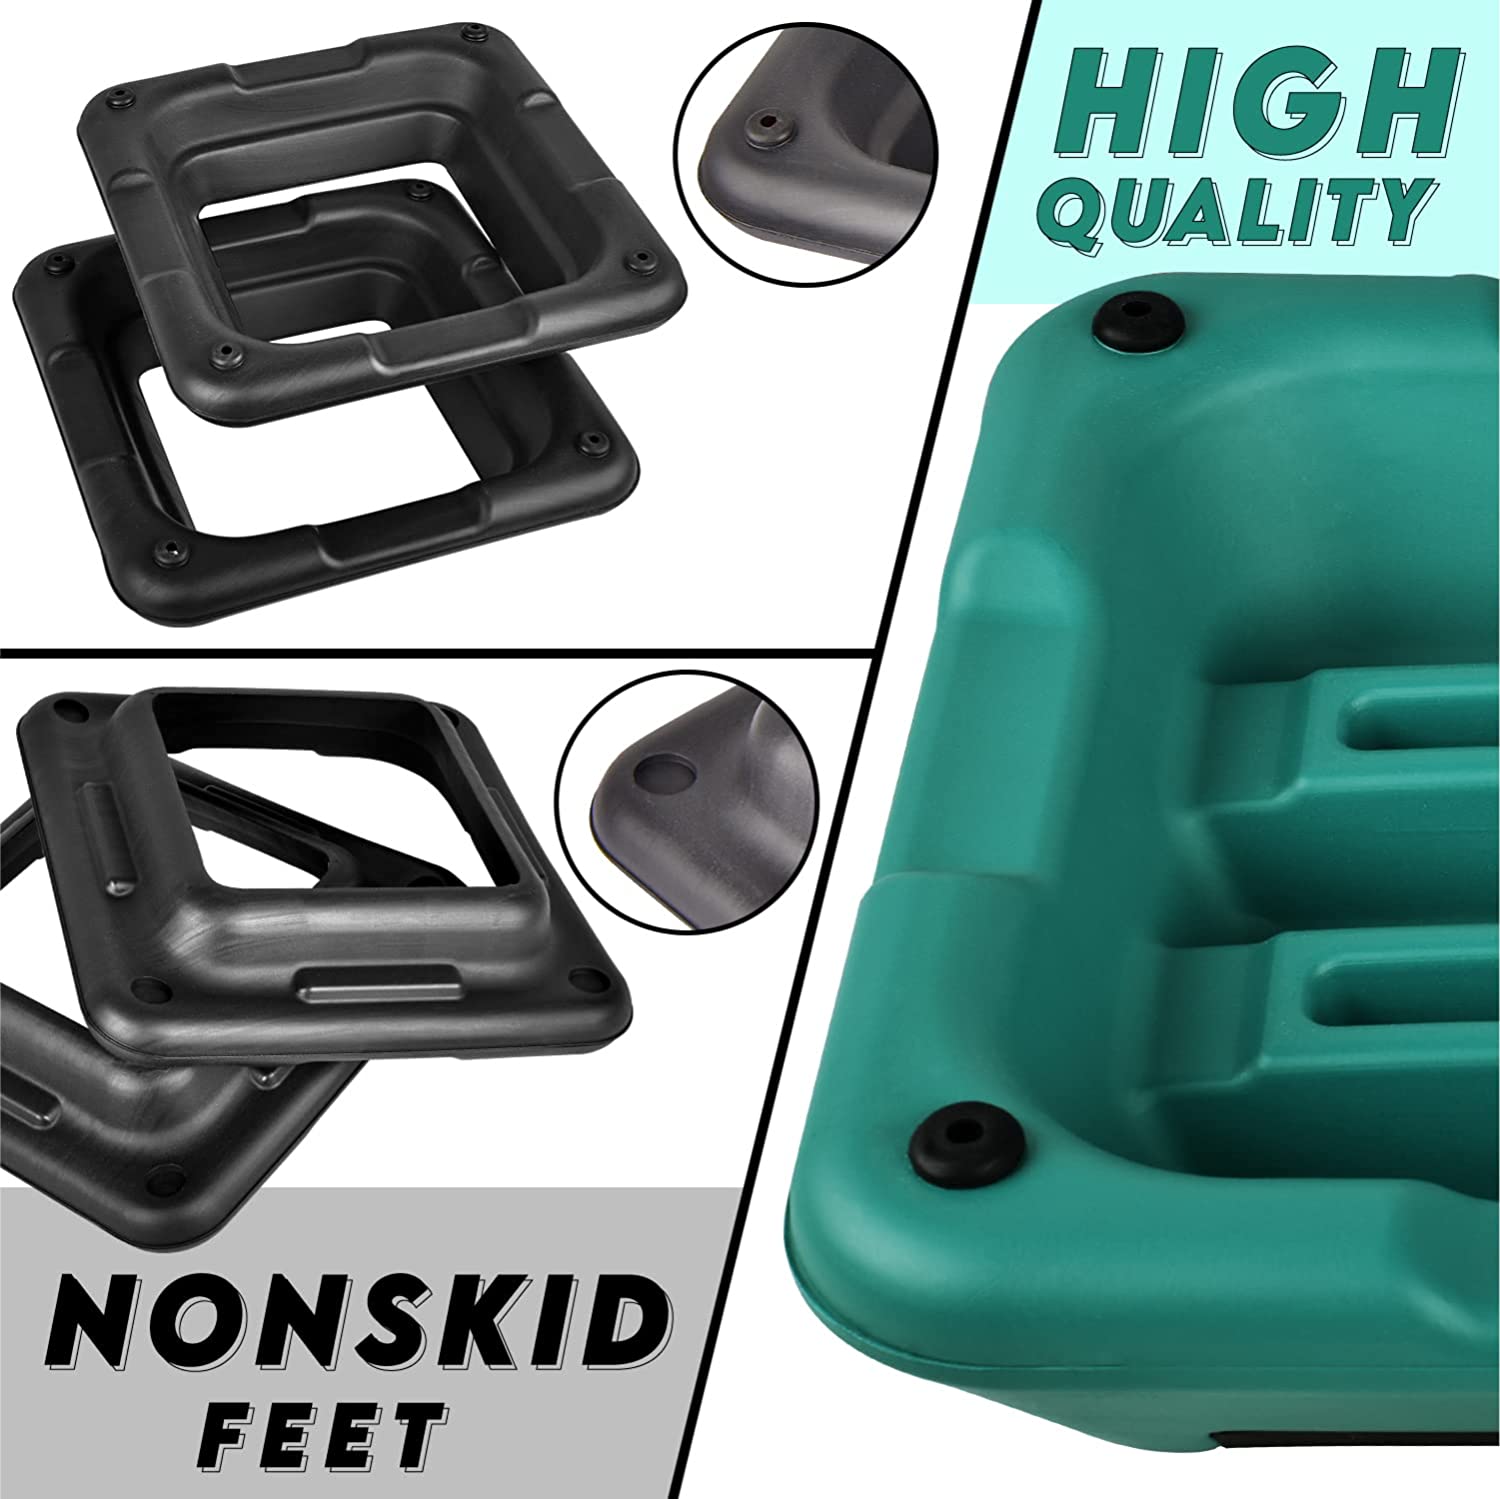 Yes4All Adjustable High Step Aerobic Platform, 16 in x 16 in, for Aerobic Step Exercises (Black/Green) - image 5 of 7